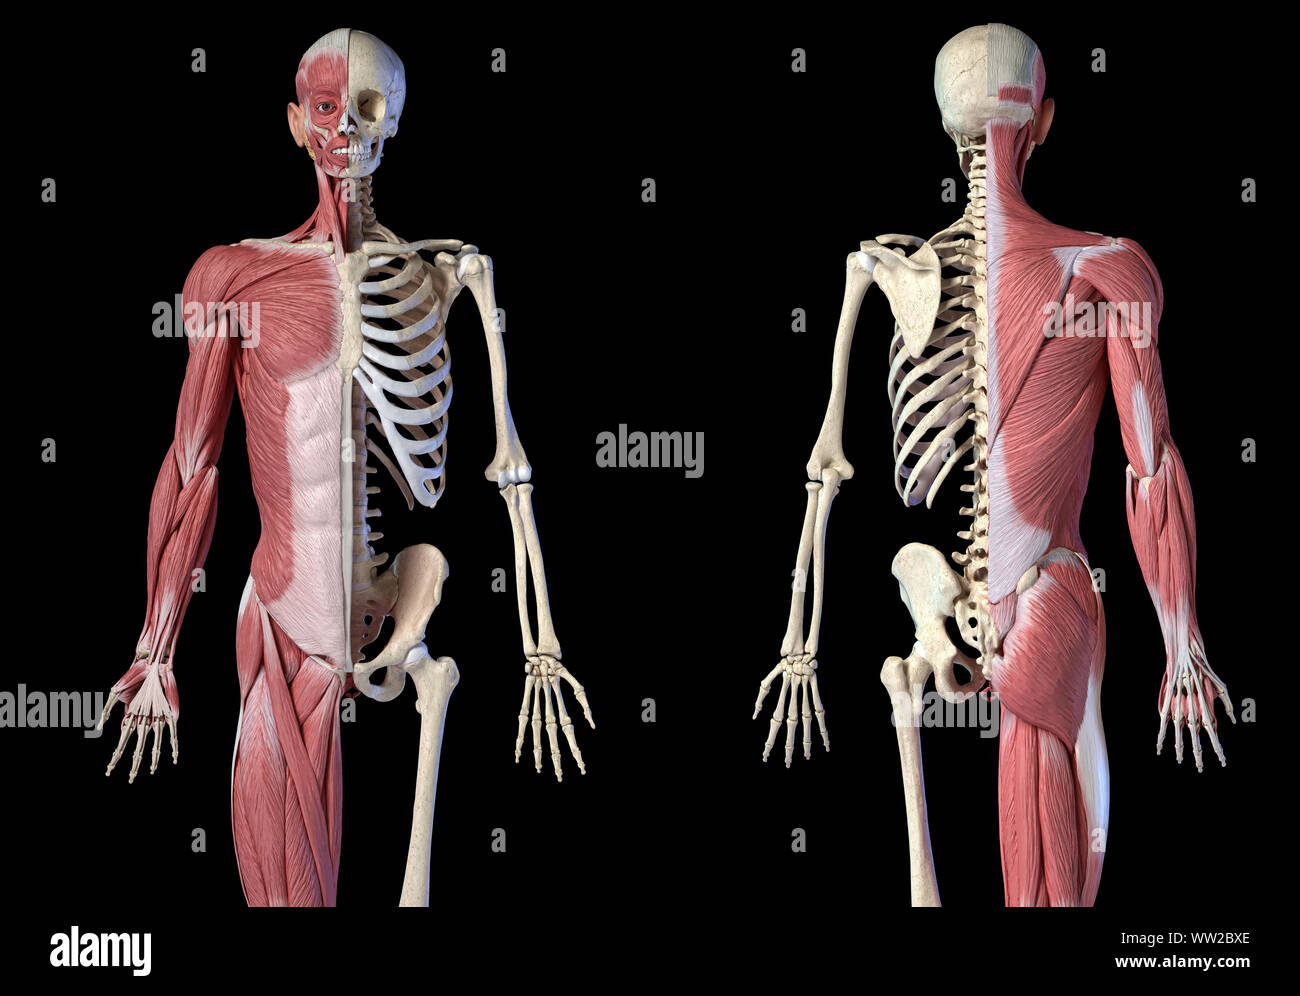 Human male anatomy, 3/4 figure muscular and skeletal systems, front and back views on black background. 3d anatomy illustration. Stock Photo